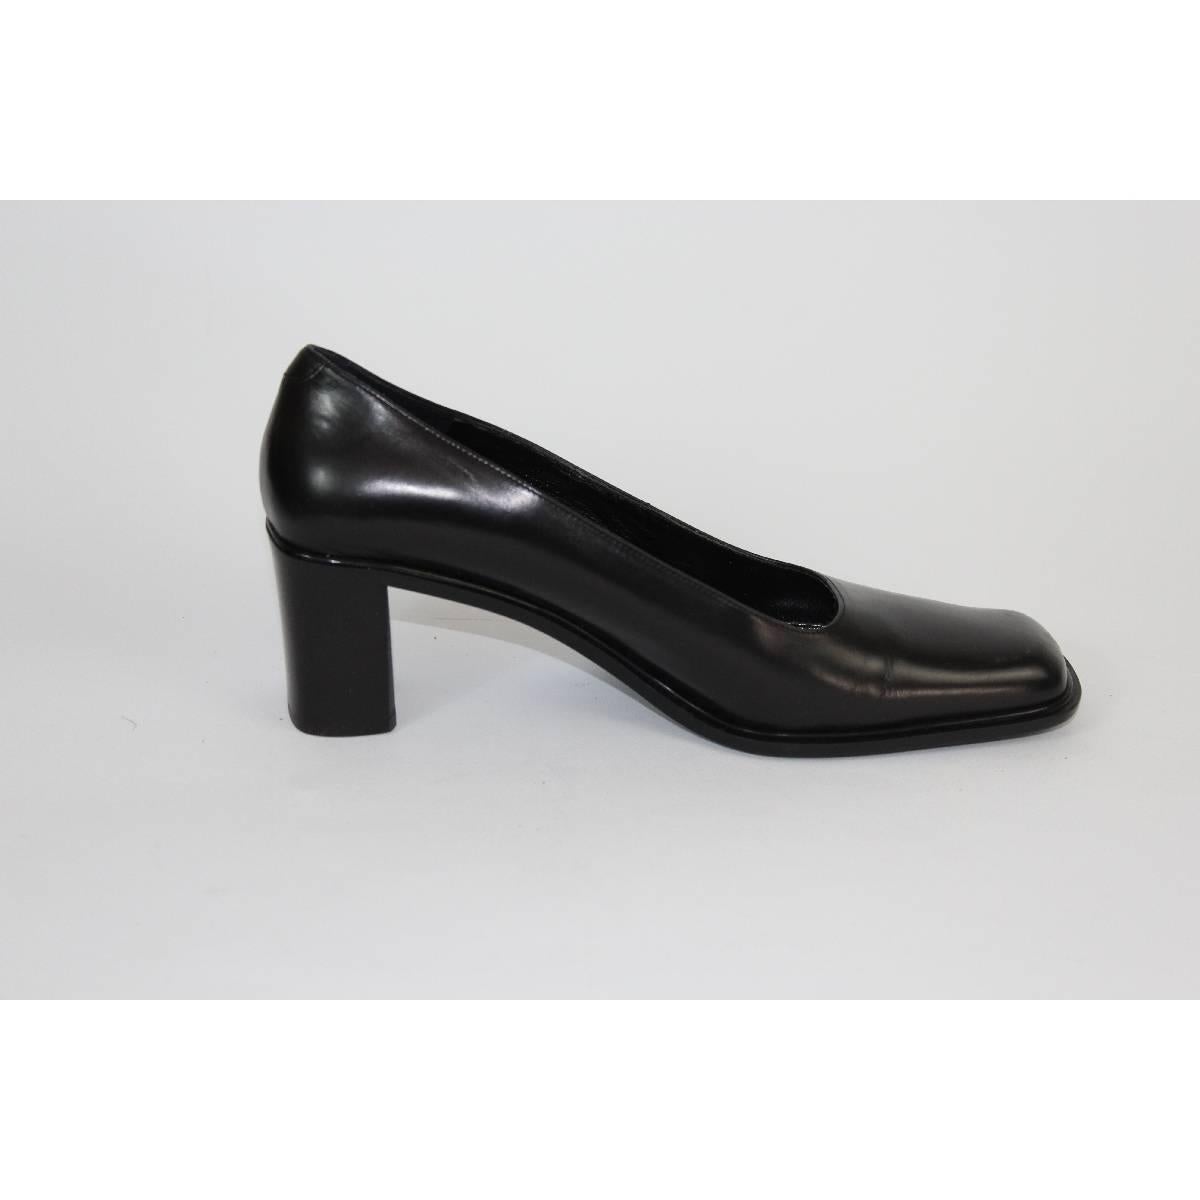 Via Spiga black leather shoe woman, size 41 it, heel and square toe, new never used

Size 41 it

Heel height: 7 cm

Composition: leather
Color: black
Condition: new never used